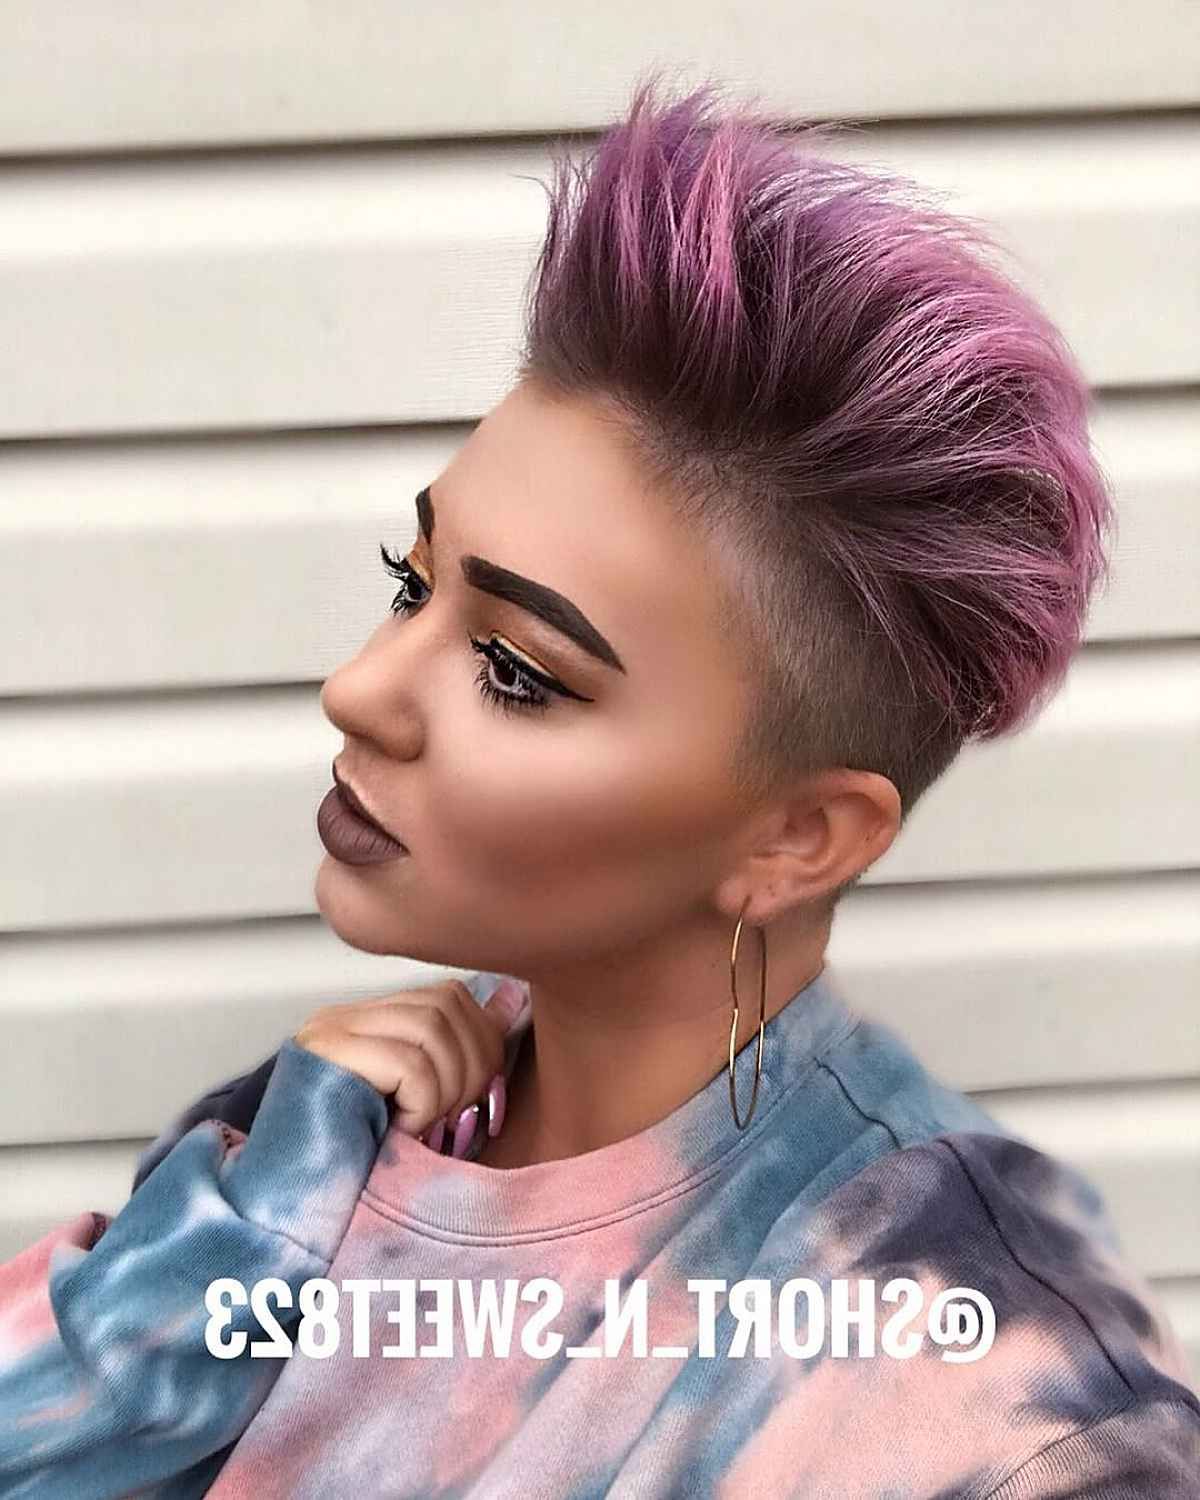 16 Spiky Pixie Cuts For A Bold, Yet Super Cute Look In Blue Punky Pixie Hairstyles With Undercut (View 7 of 20)